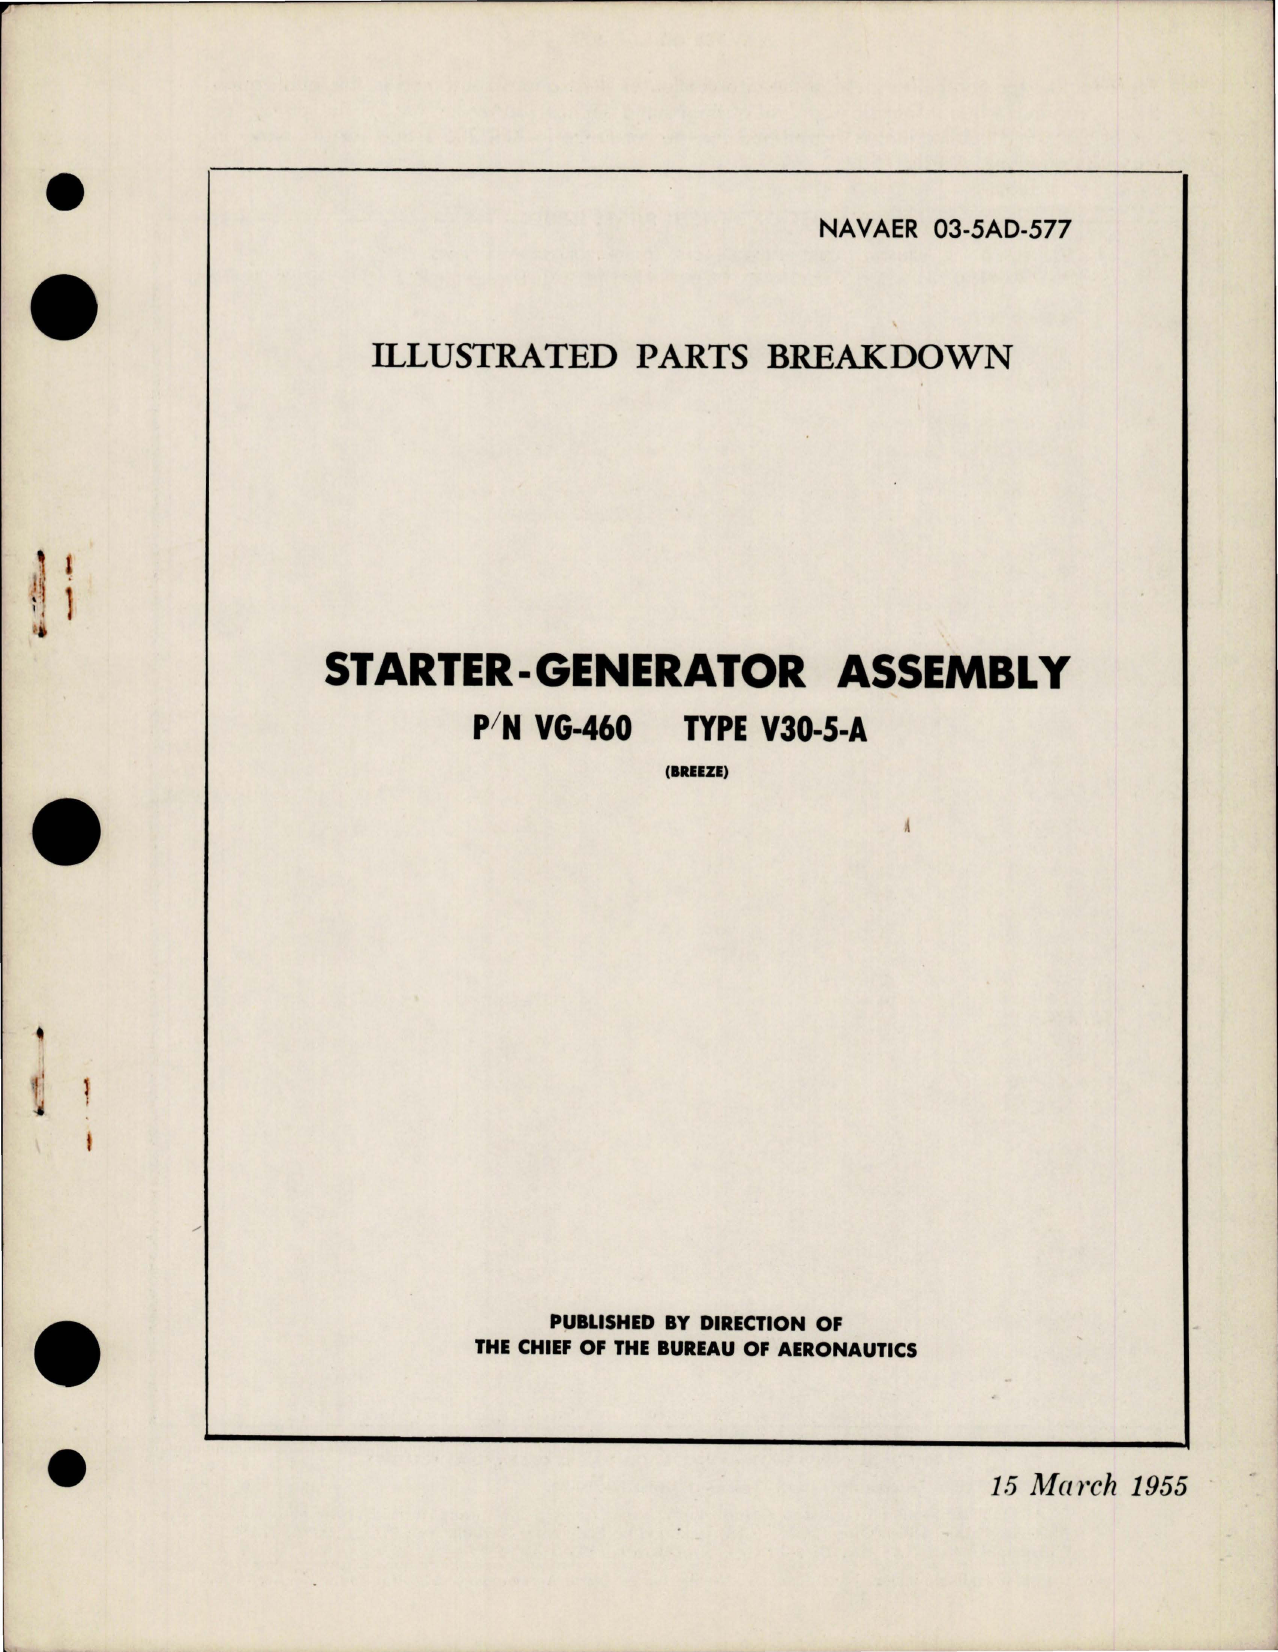 Sample page 1 from AirCorps Library document: Illustrated Parts Breakdown - Starter Generator Assembly - Part VG-460, Type V30-5-A